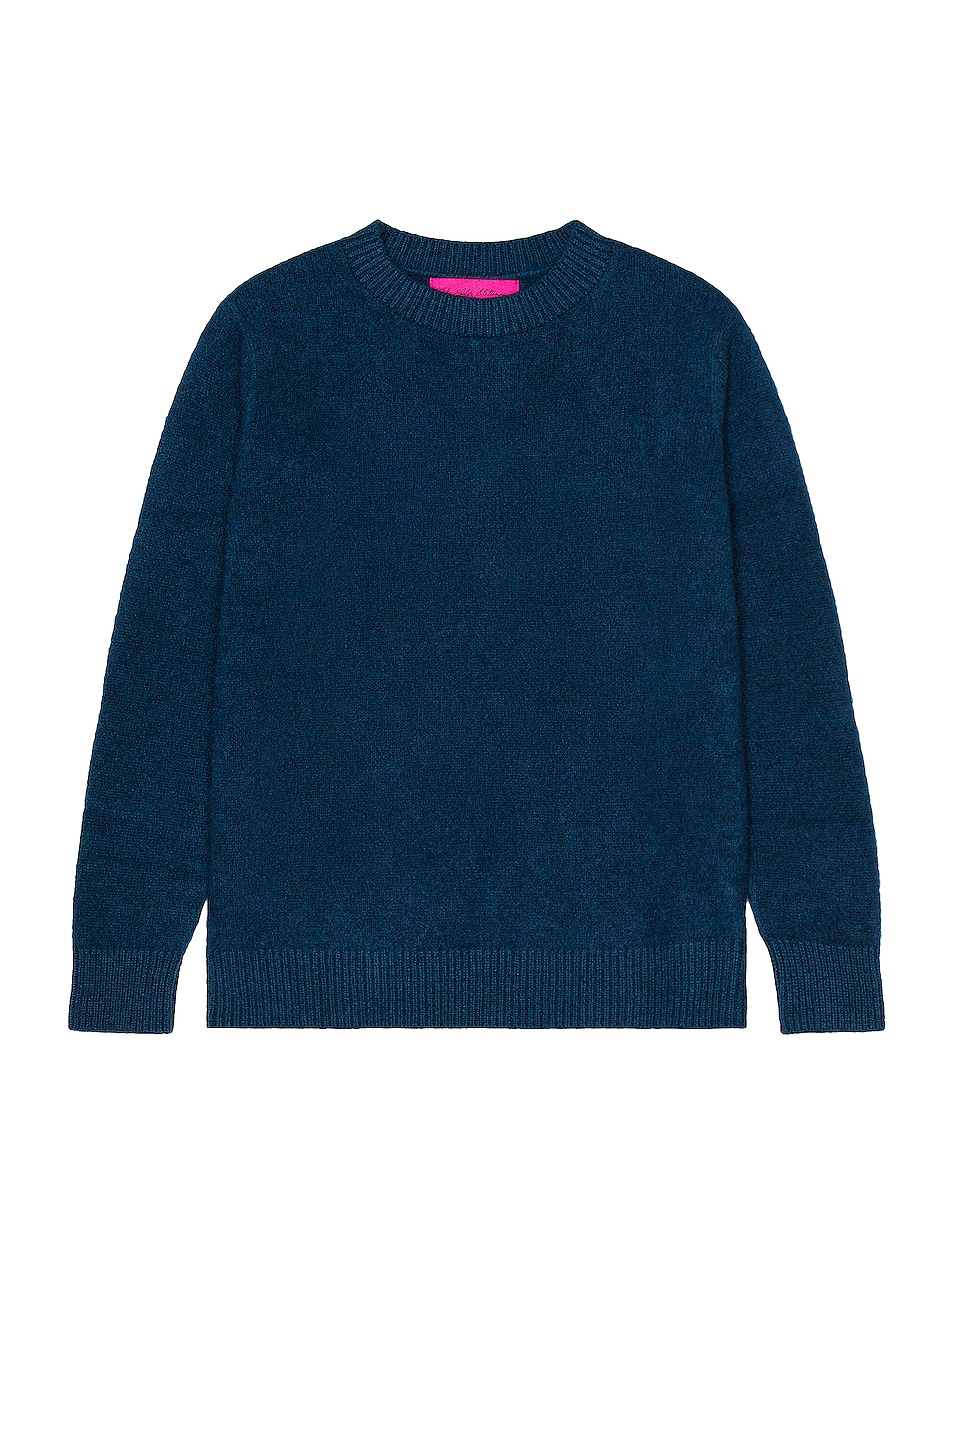 Image 1 of The Elder Statesman Cashmere Simple Crew Sweater in Peacock